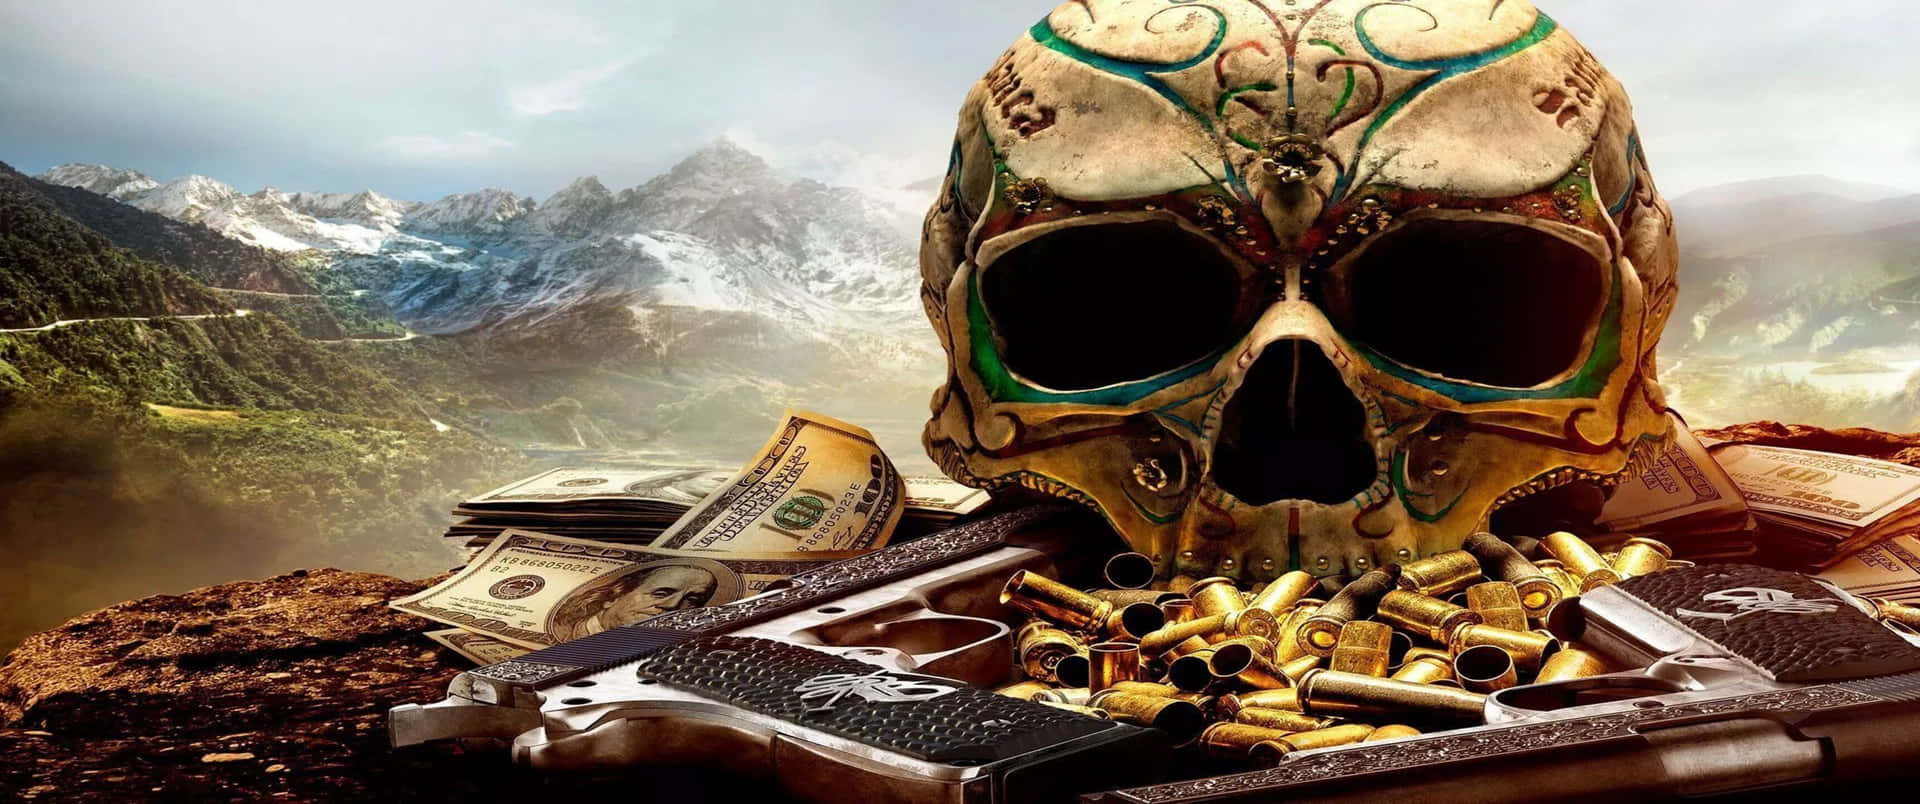 A Skull With Guns And Money On Top Of It